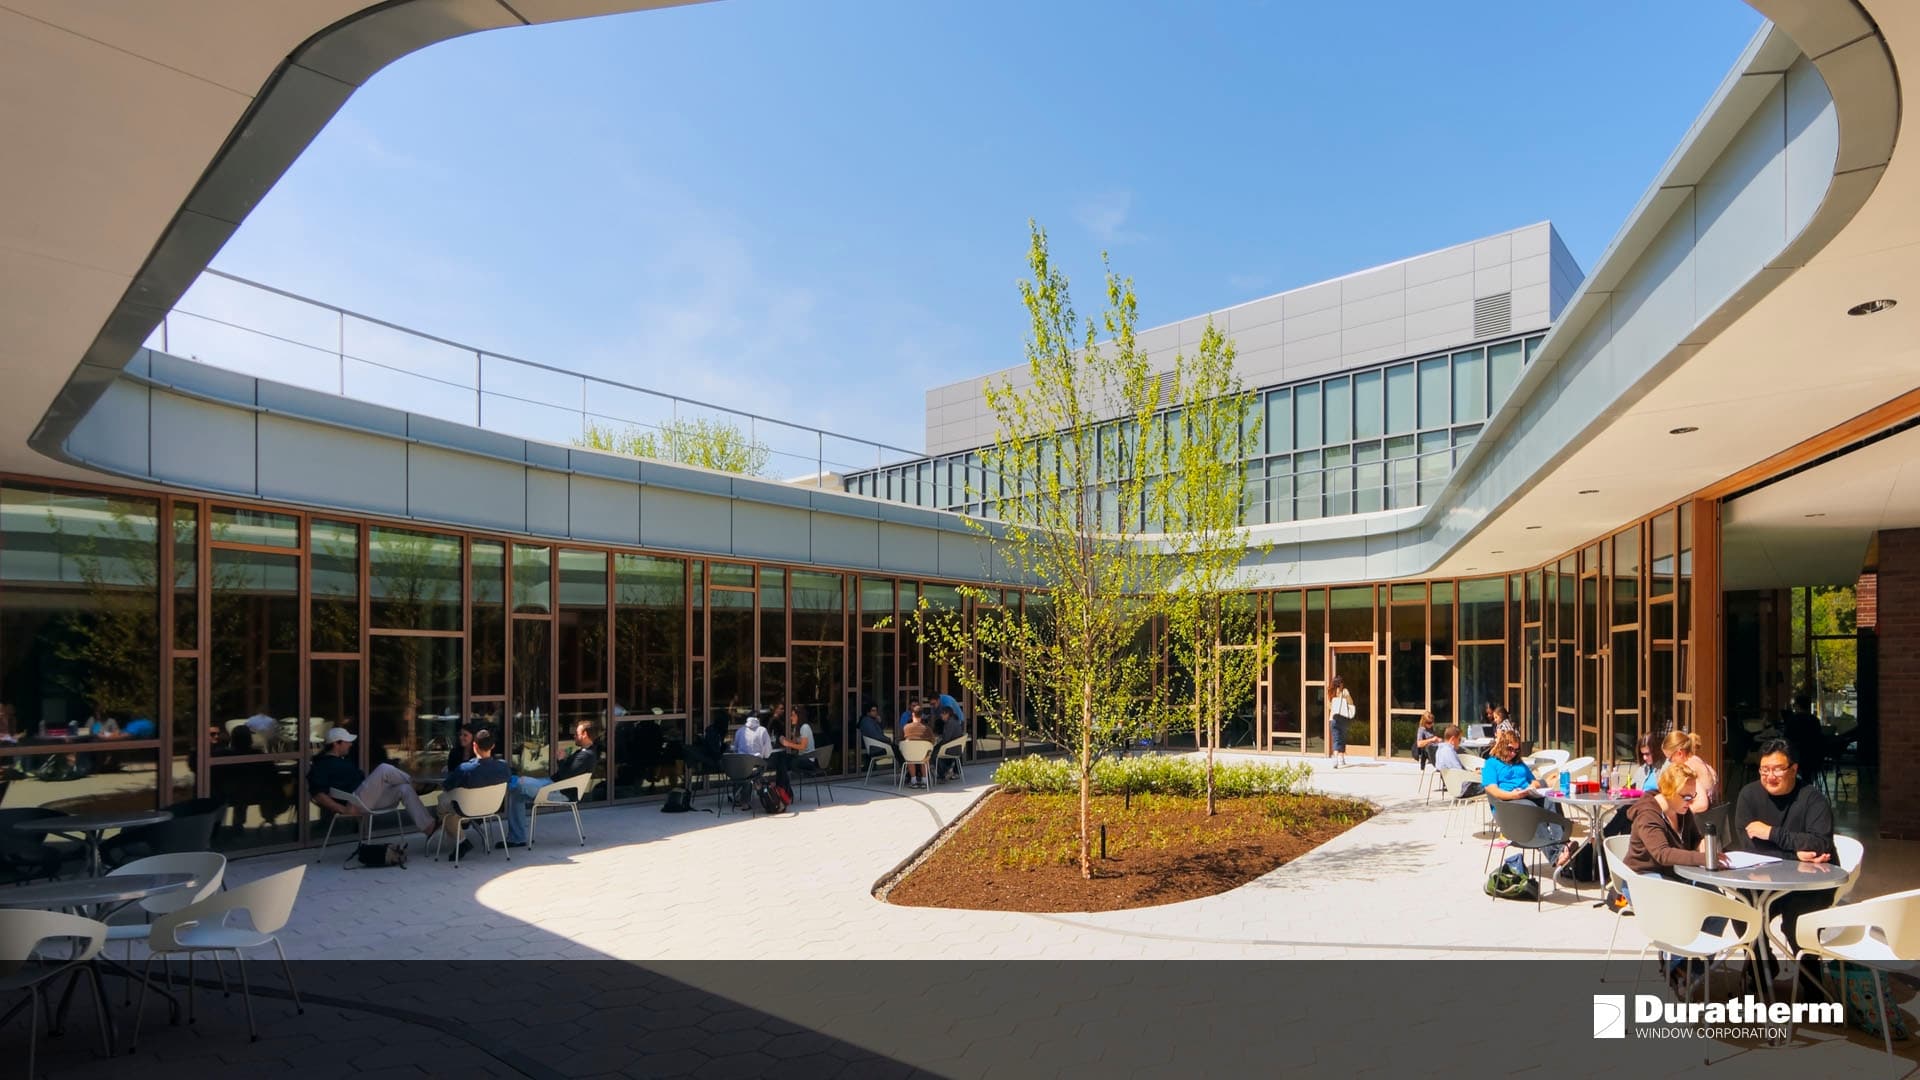 Educational building courtyard with window walls